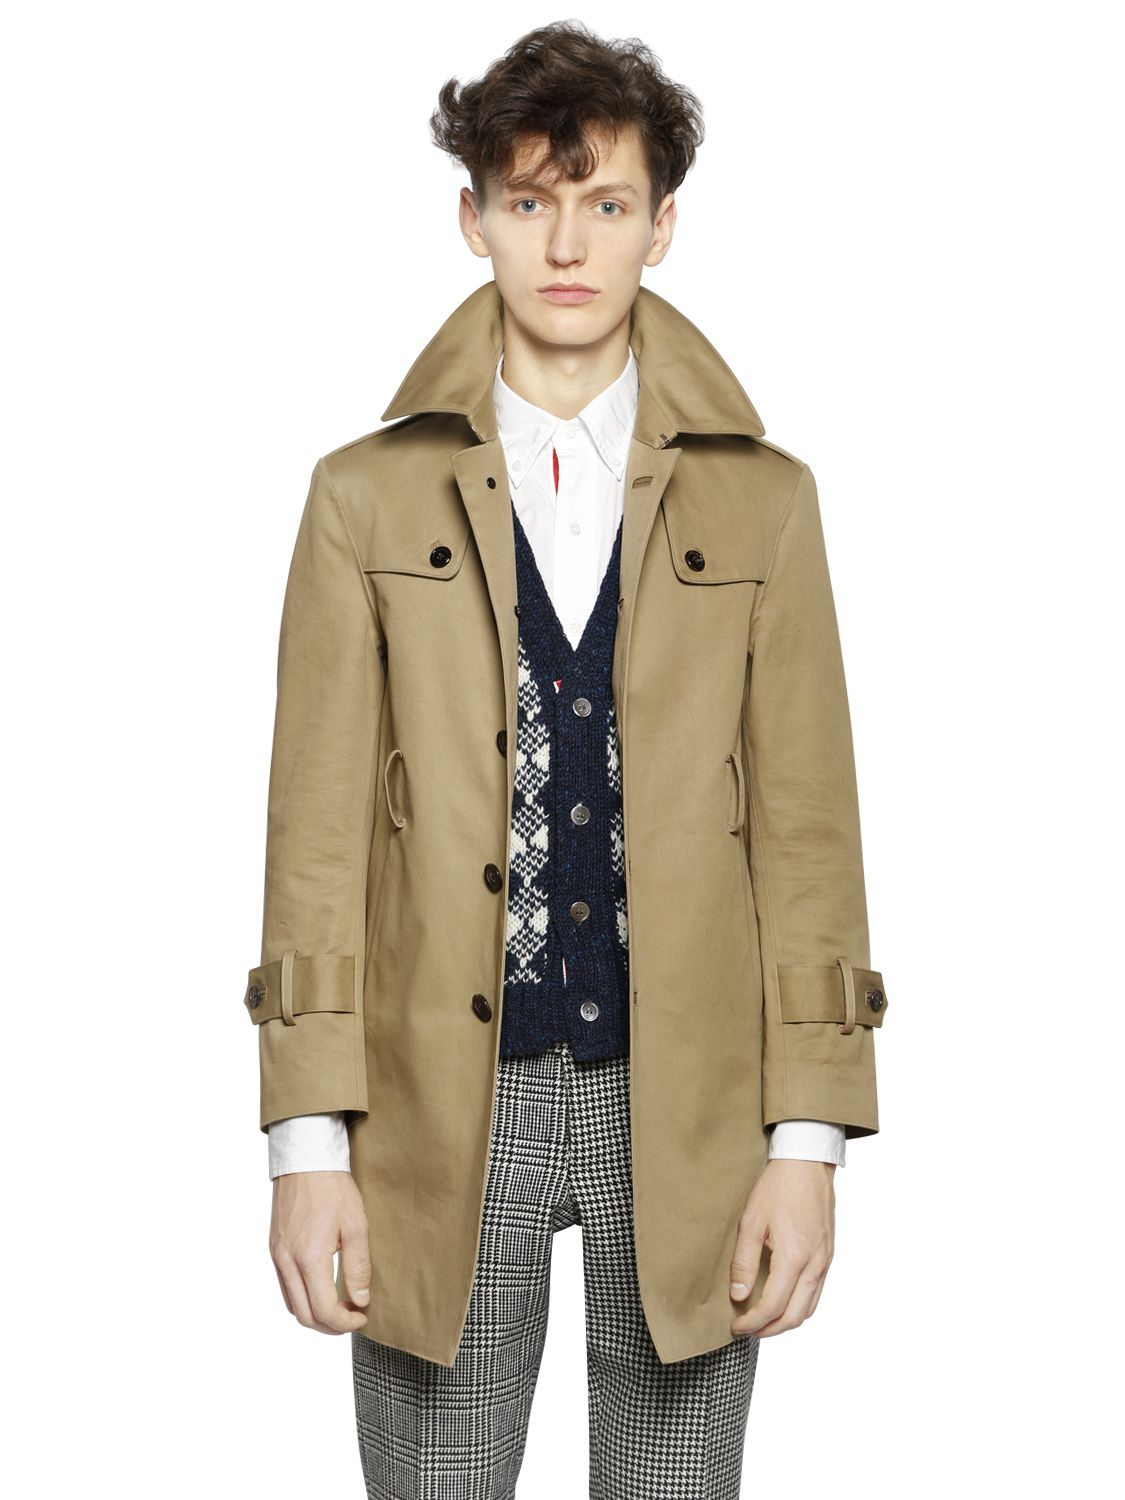 Thom Browne Cotton Mac Trench Coat in Natural for Men - Lyst